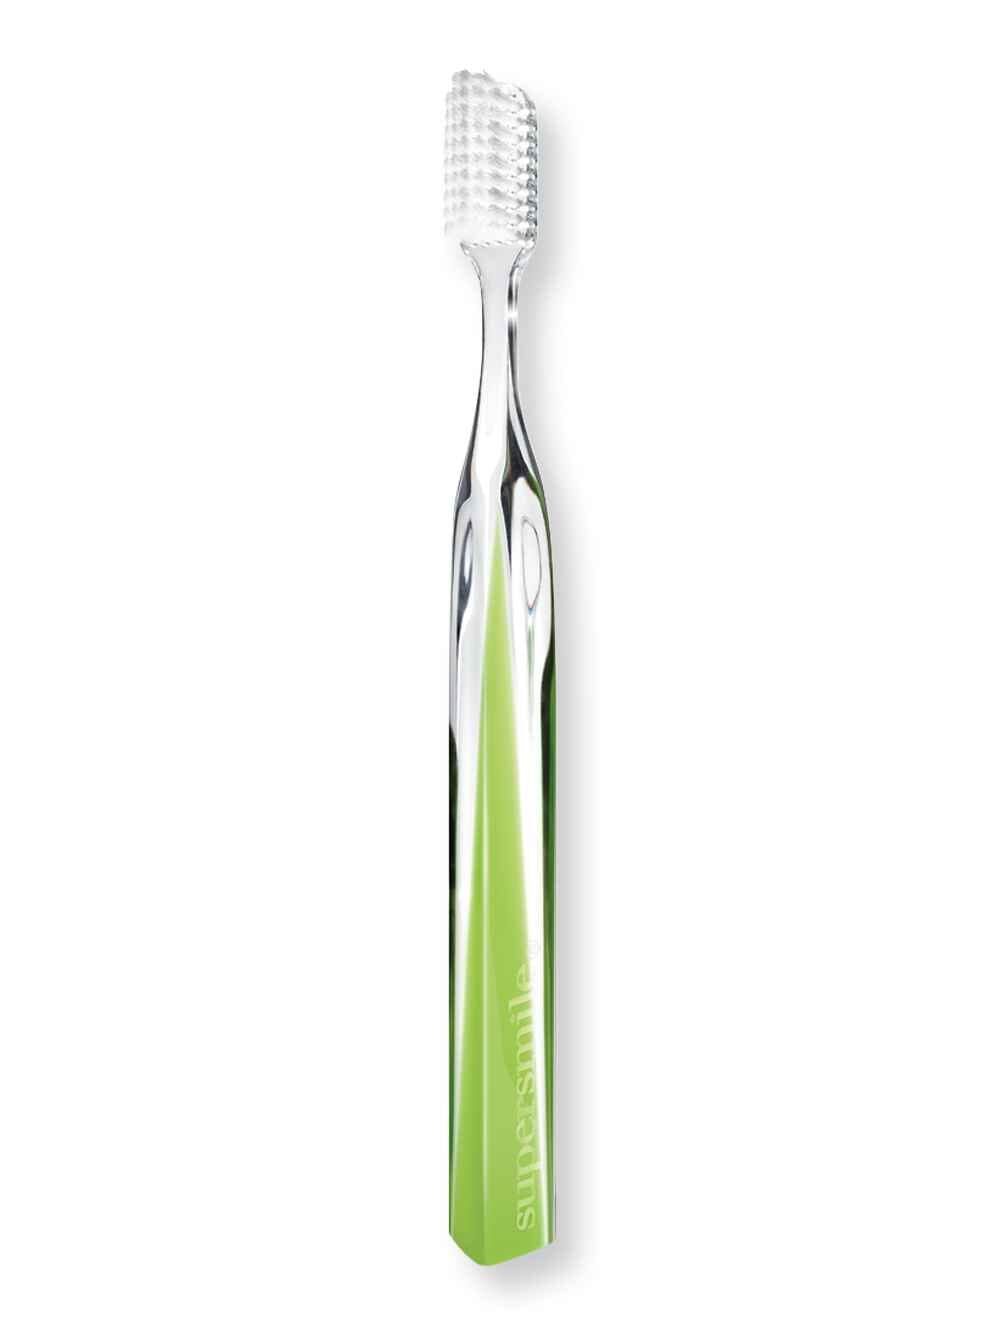 Supersmile Supersmile Crystal Collection 45 Toothbrush Green Peridot Electric & Manual Toothbrushes 